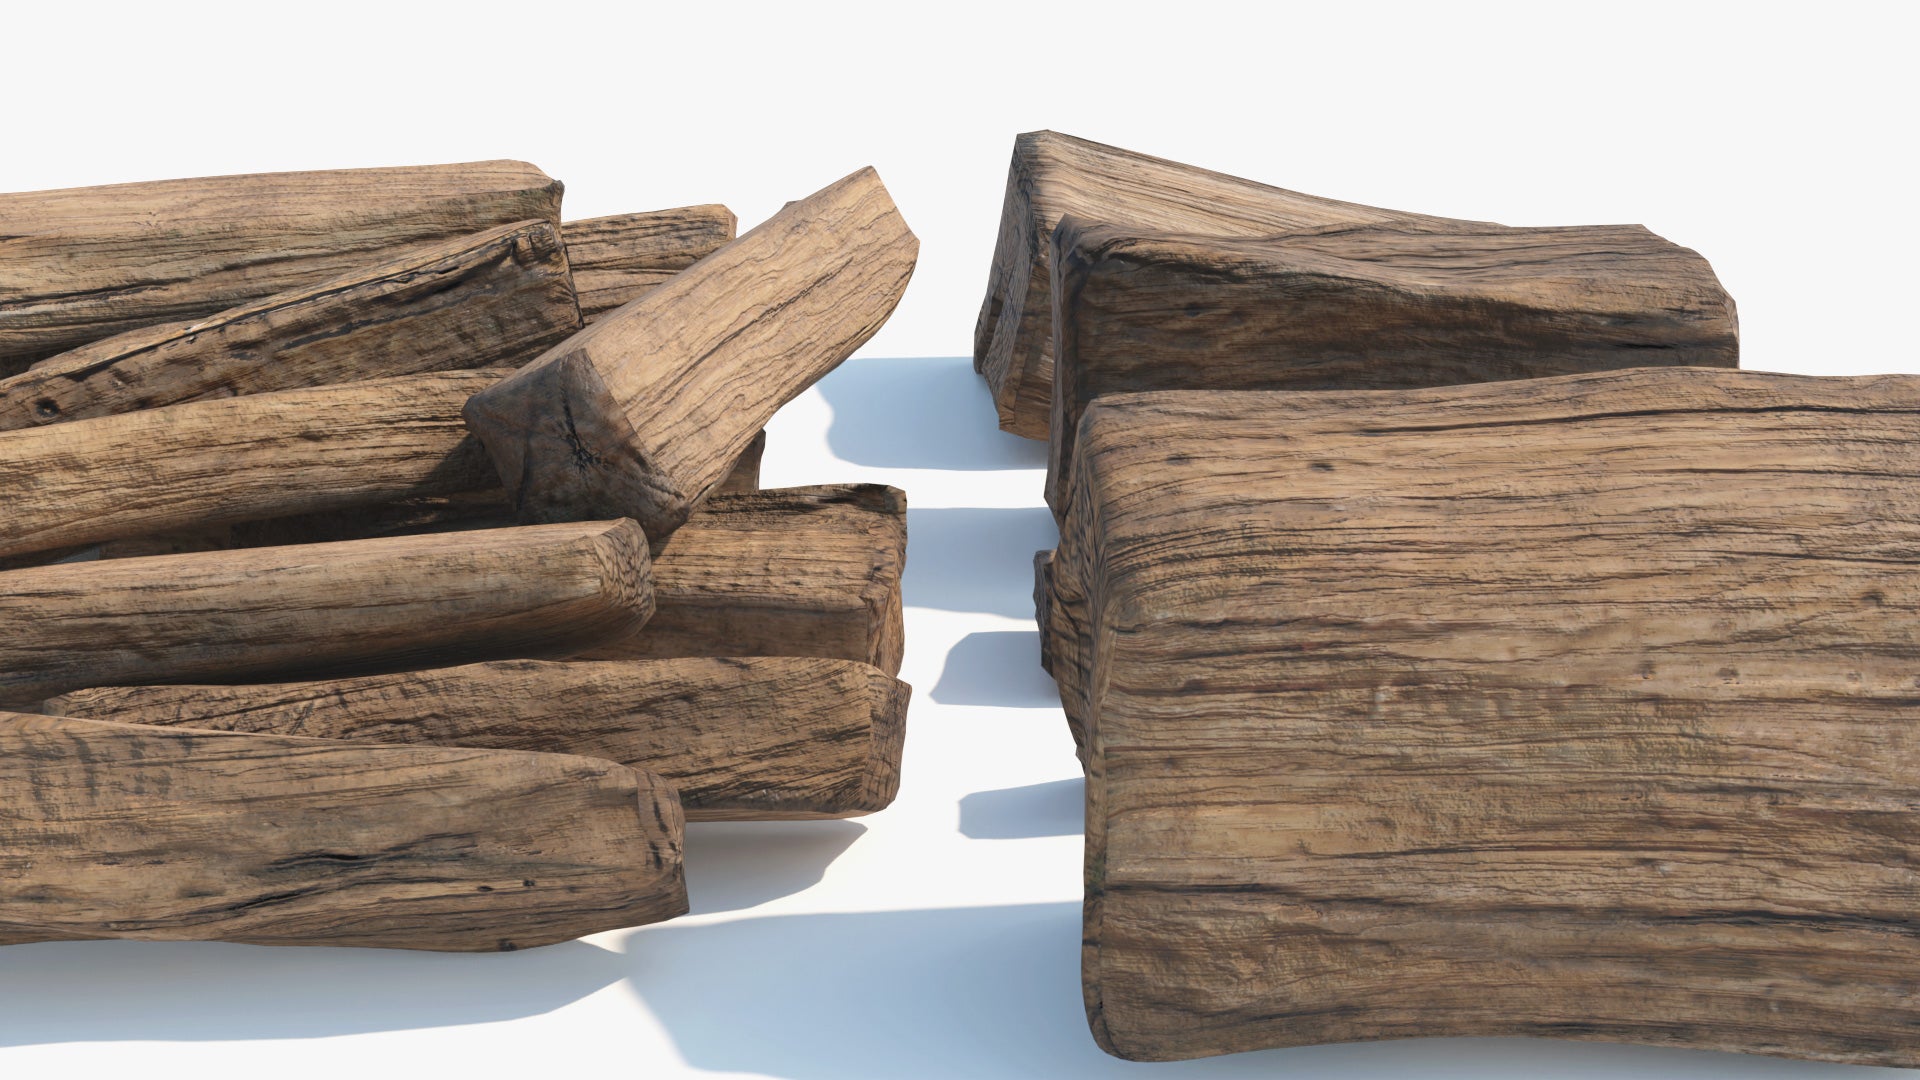 Closeup of a 3D model of neatly cut lumber. The textures are rough and the wood looks a bit dry